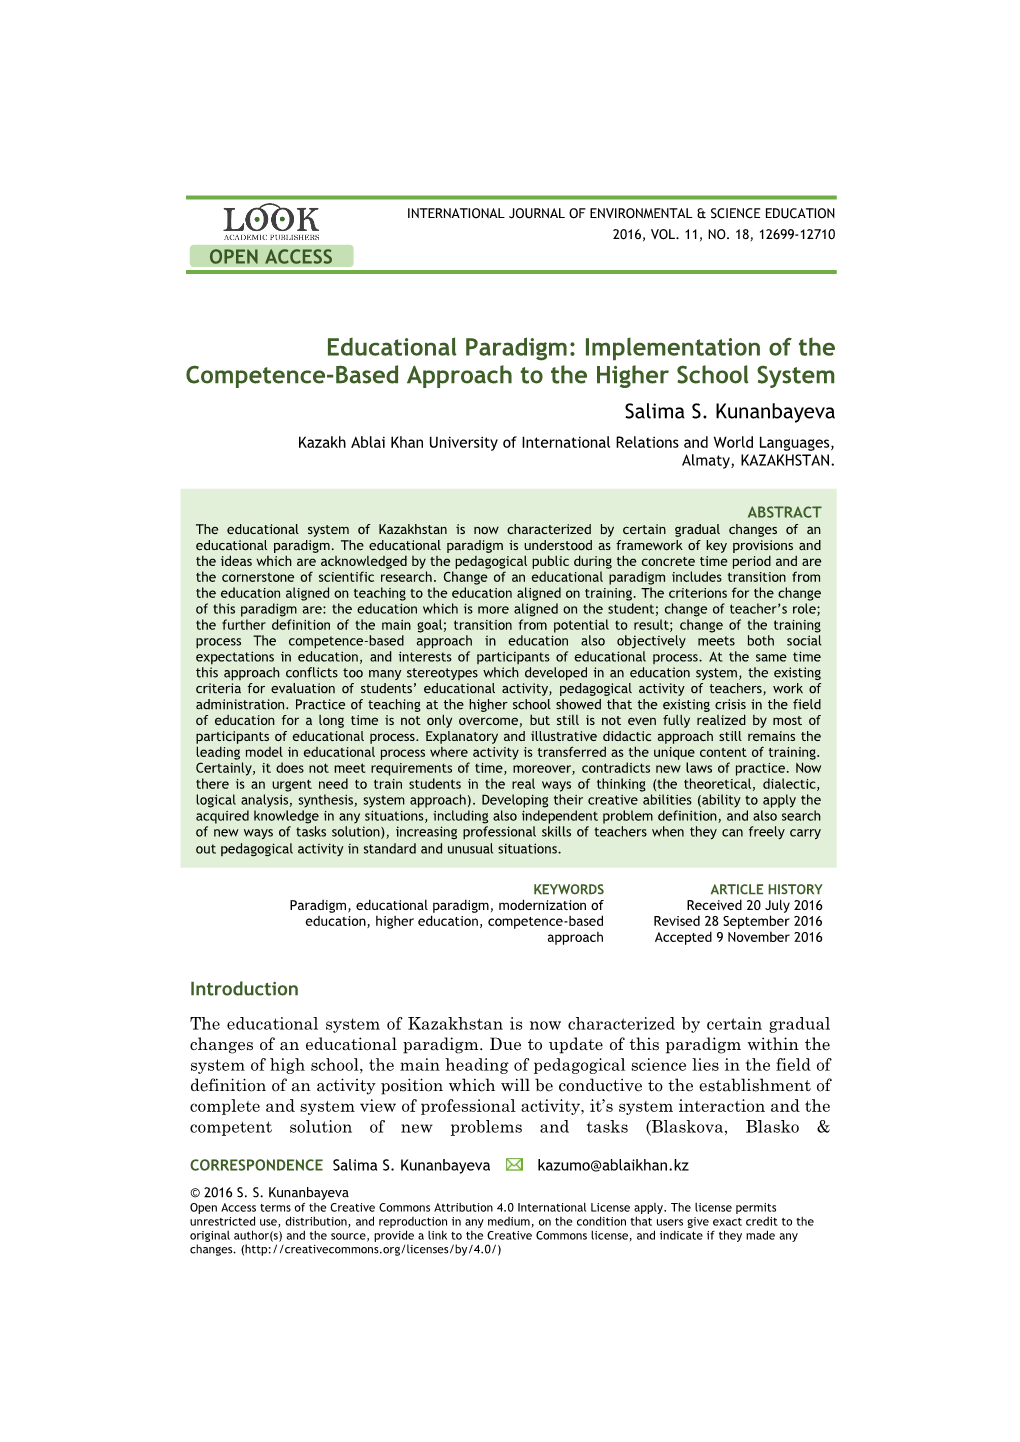 Educational Paradigm: Implementation of the Competence-Based Approach to the Higher School System Salima S